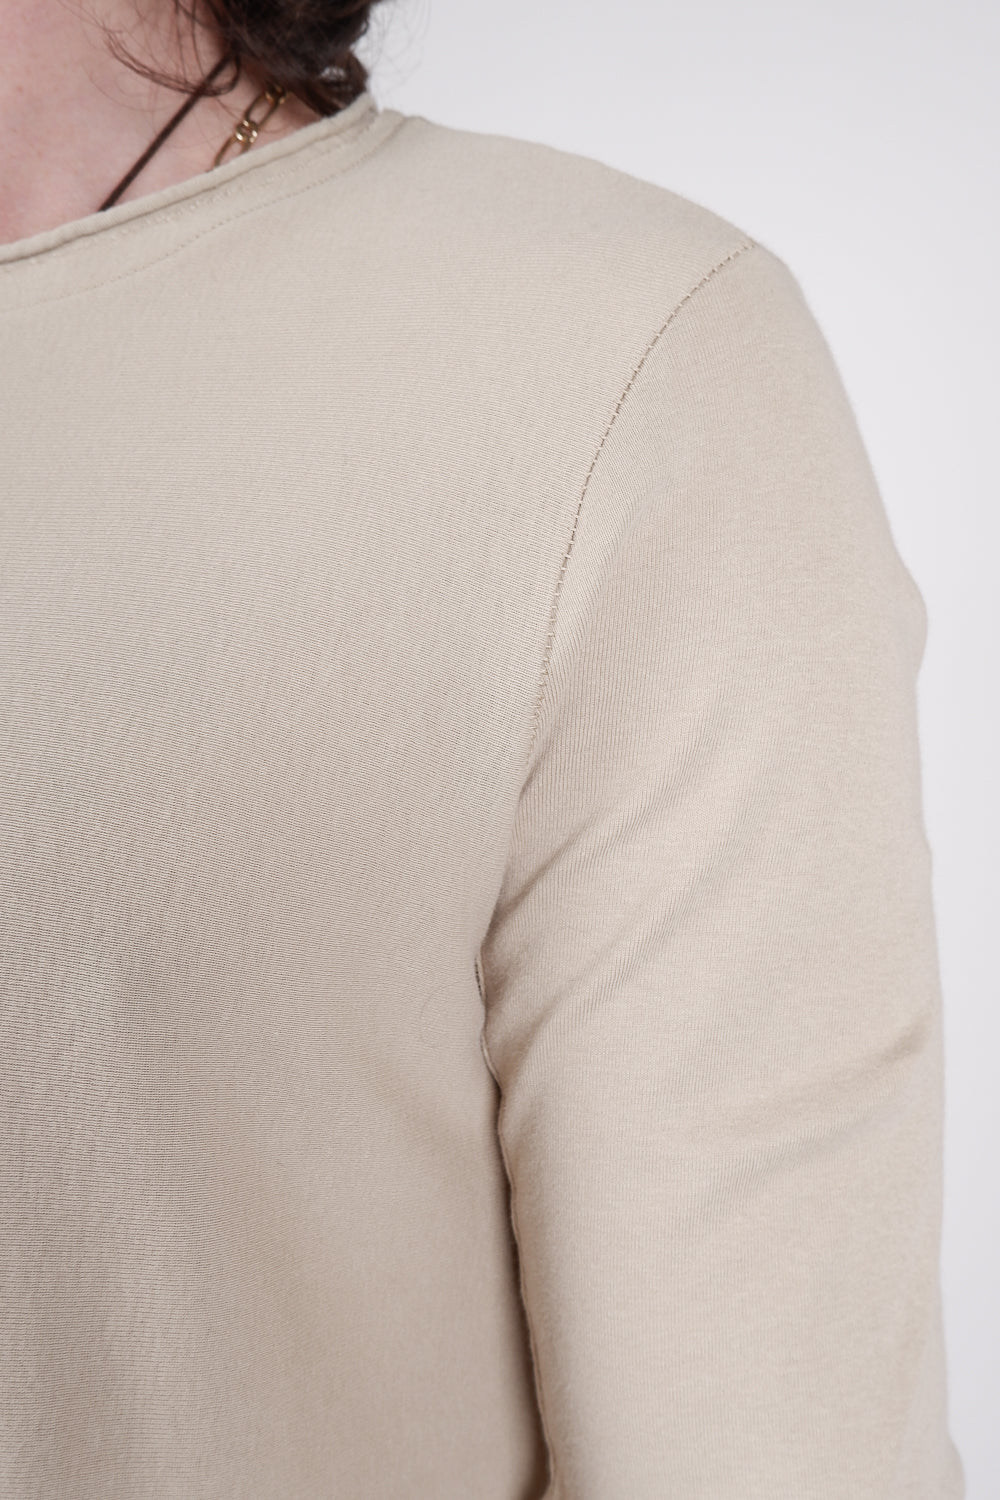 Buy the Hannes Roether Raw Neck Cotton L/S T-Shirt in Sand at Intro. Spend £50 for free UK delivery. Official stockists. We ship worldwide.